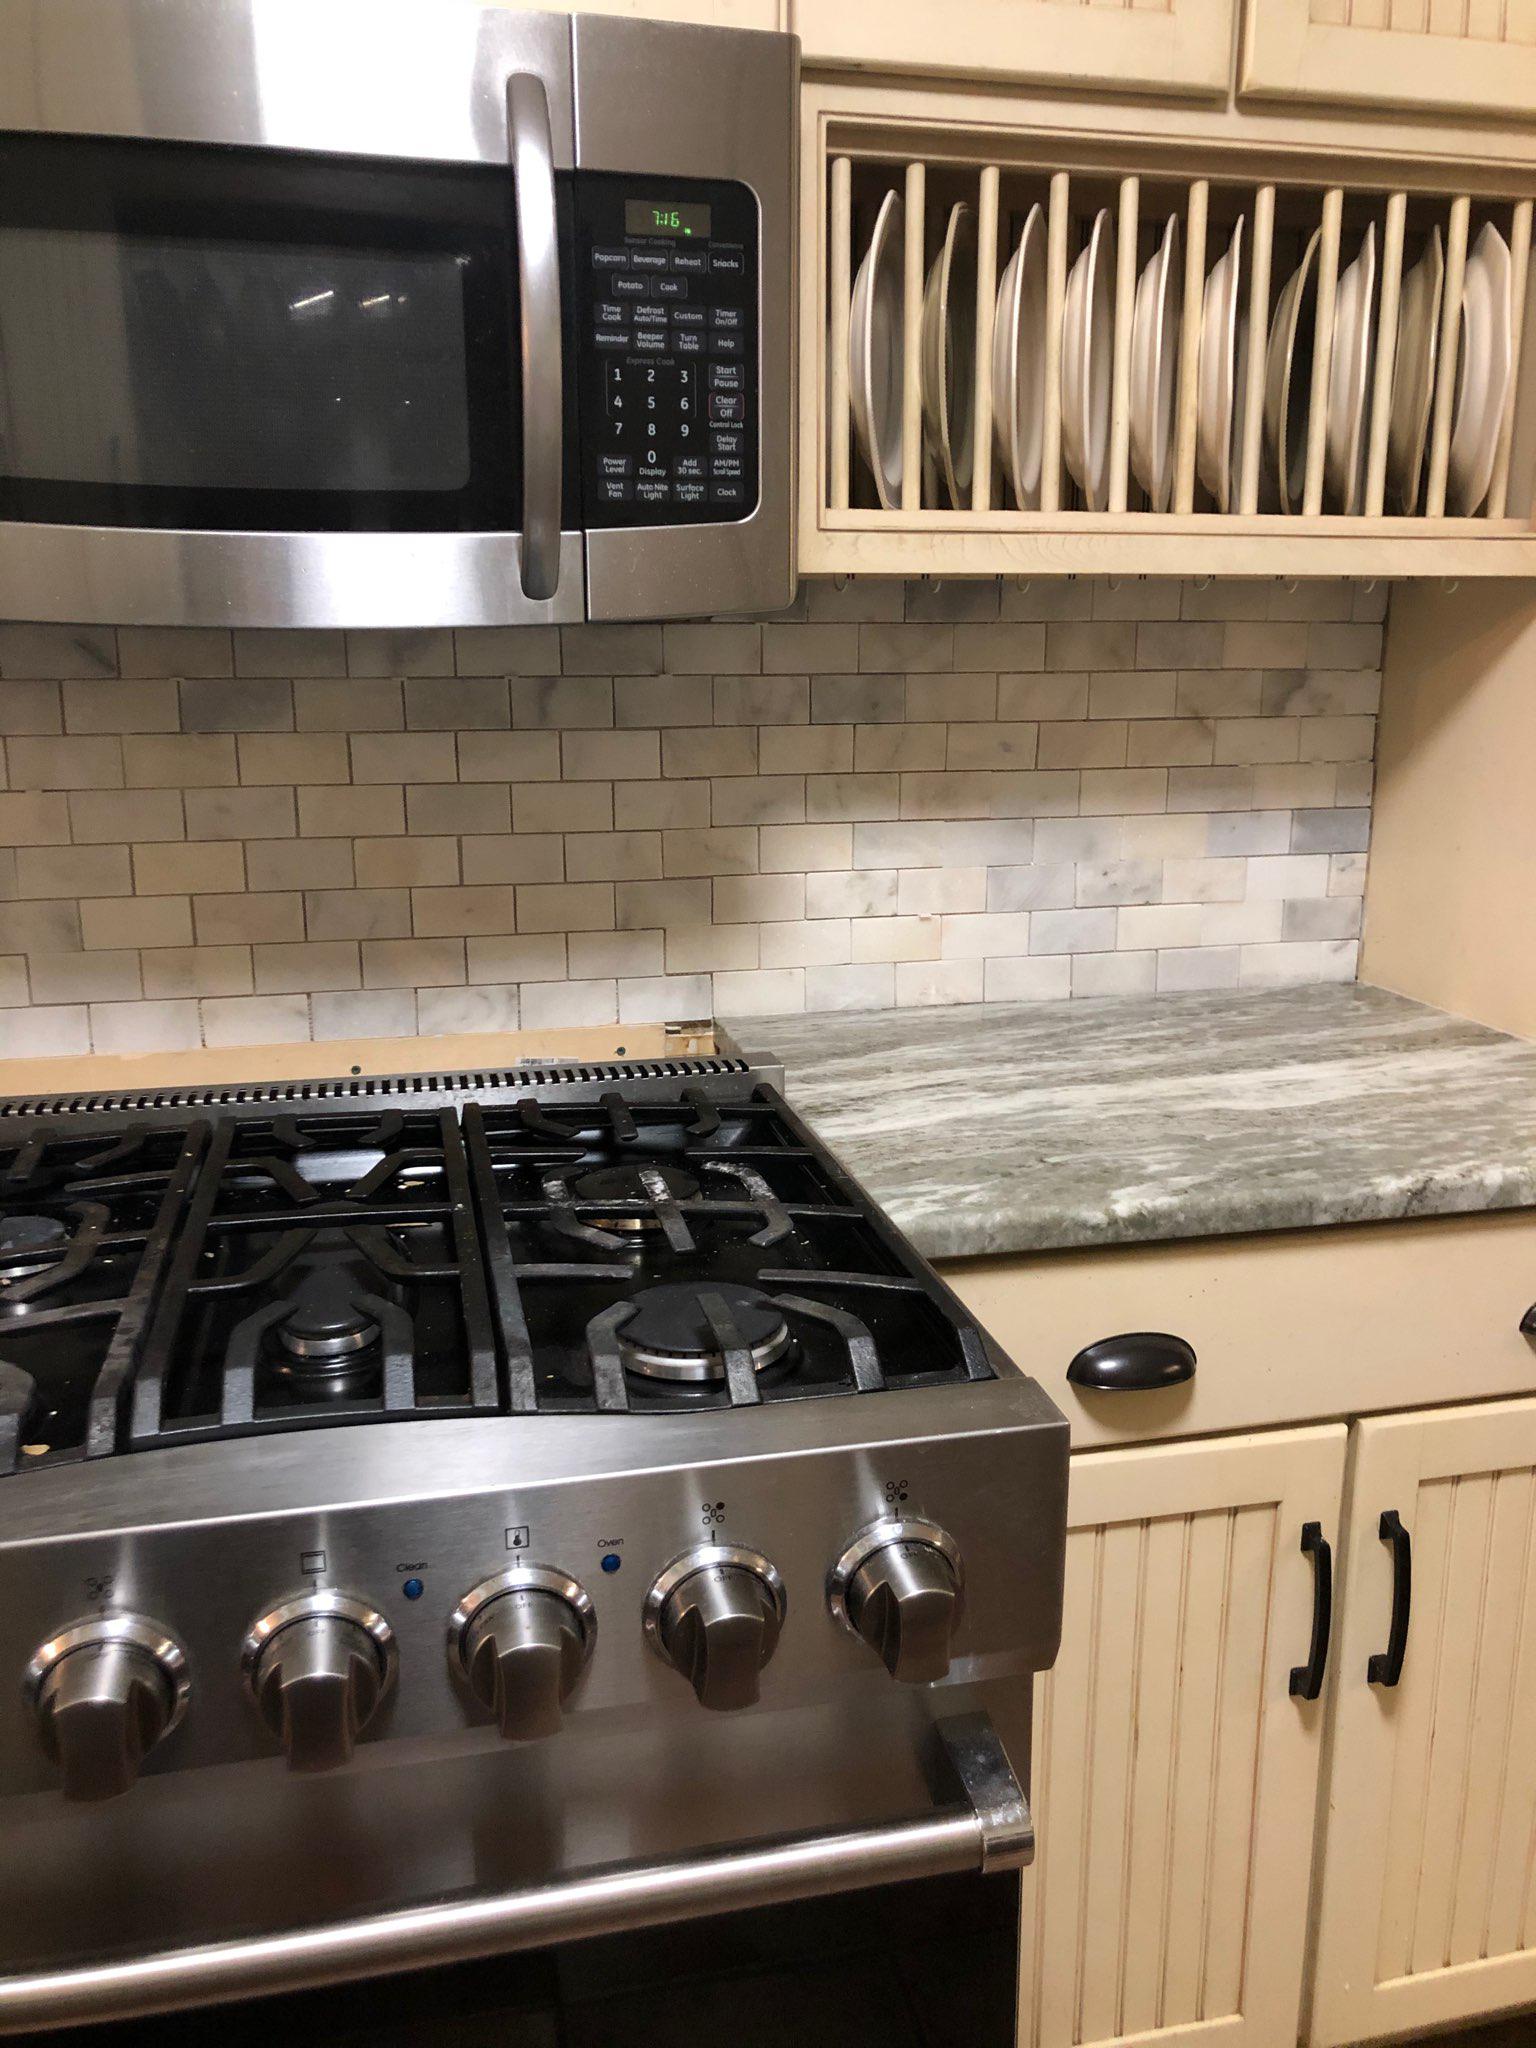 Gorgeous Backsplash being installed today!! We are out in Tempe this morning to install this beautiful new build. It looks flawless in this house! ï¿¼ Call Home Solutionz Today For Your Flooring Project <(623) 289-3880>. Home Solutionz - Tempe is Licensed, Bonded, and Insured. Home Solutionz offers 12 - 24 Months 0% Financing Through Wells Fargo. Home Solutionz Tempe - 3125 S 52nd St, Suite 107 Tempe, AZ 85282 United States  BacksplashInstallation  Backsplash